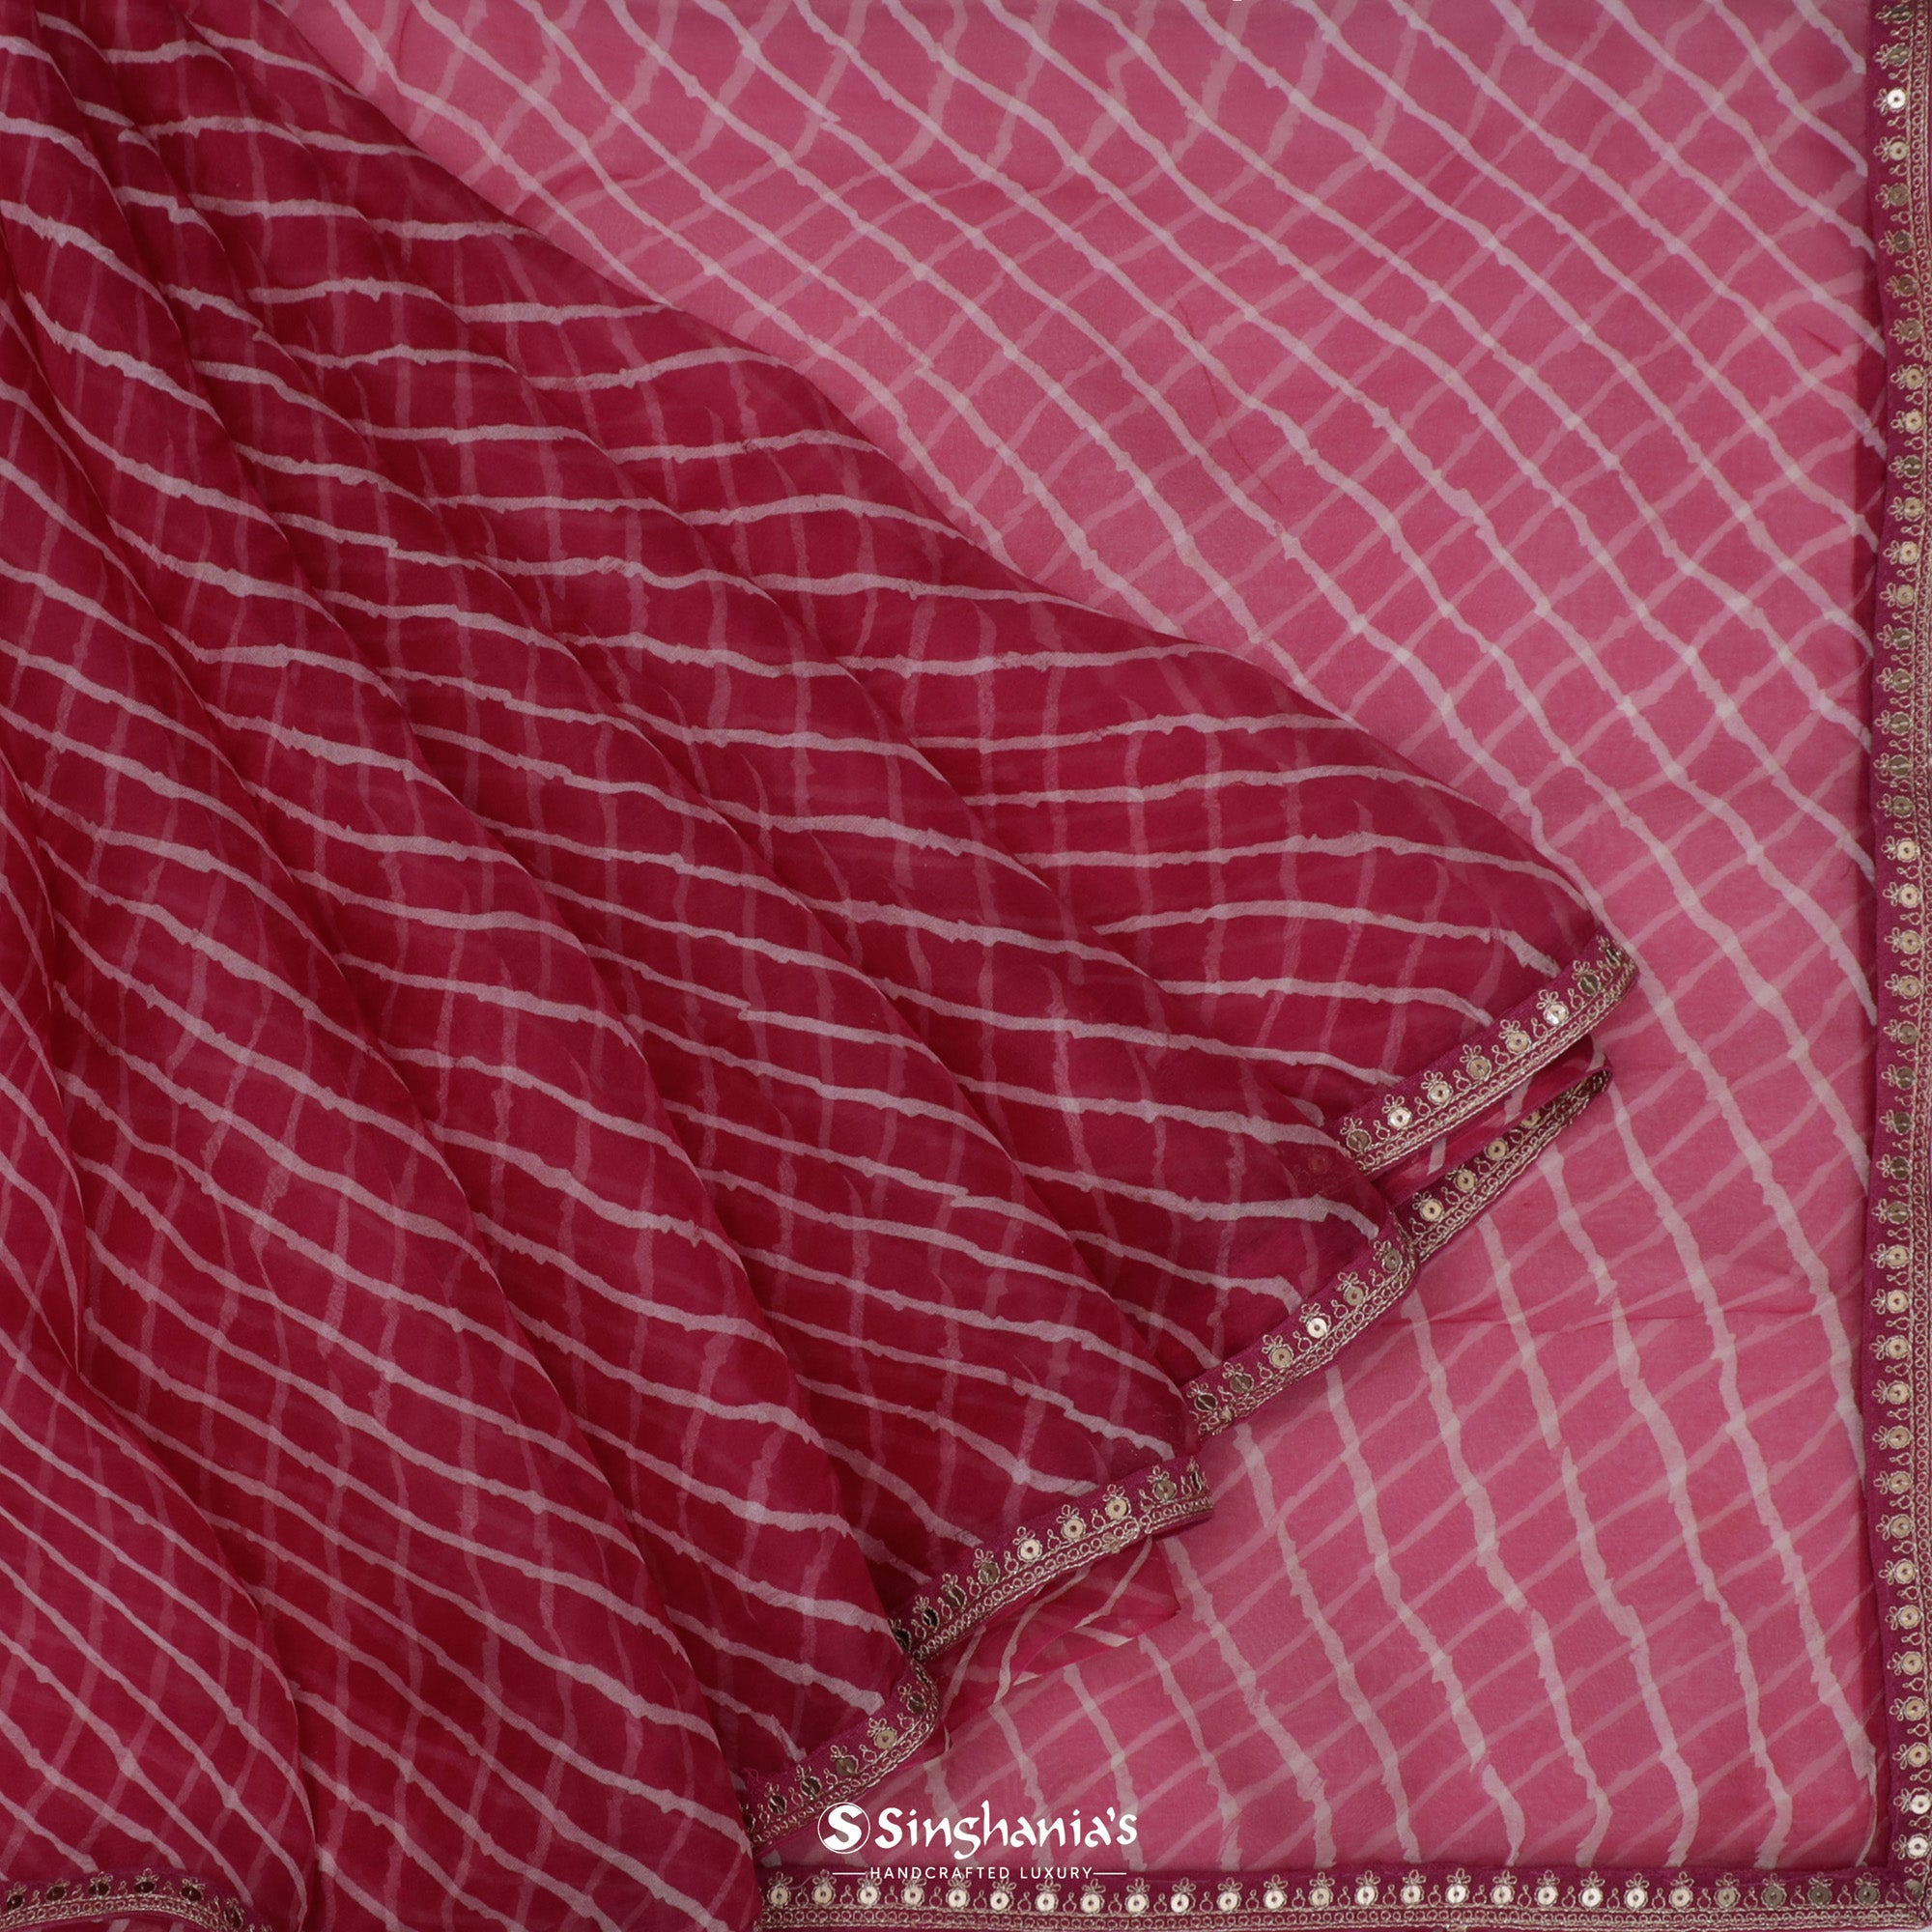 Cherry Pink Printed Organza Saree With Stripes Pattern